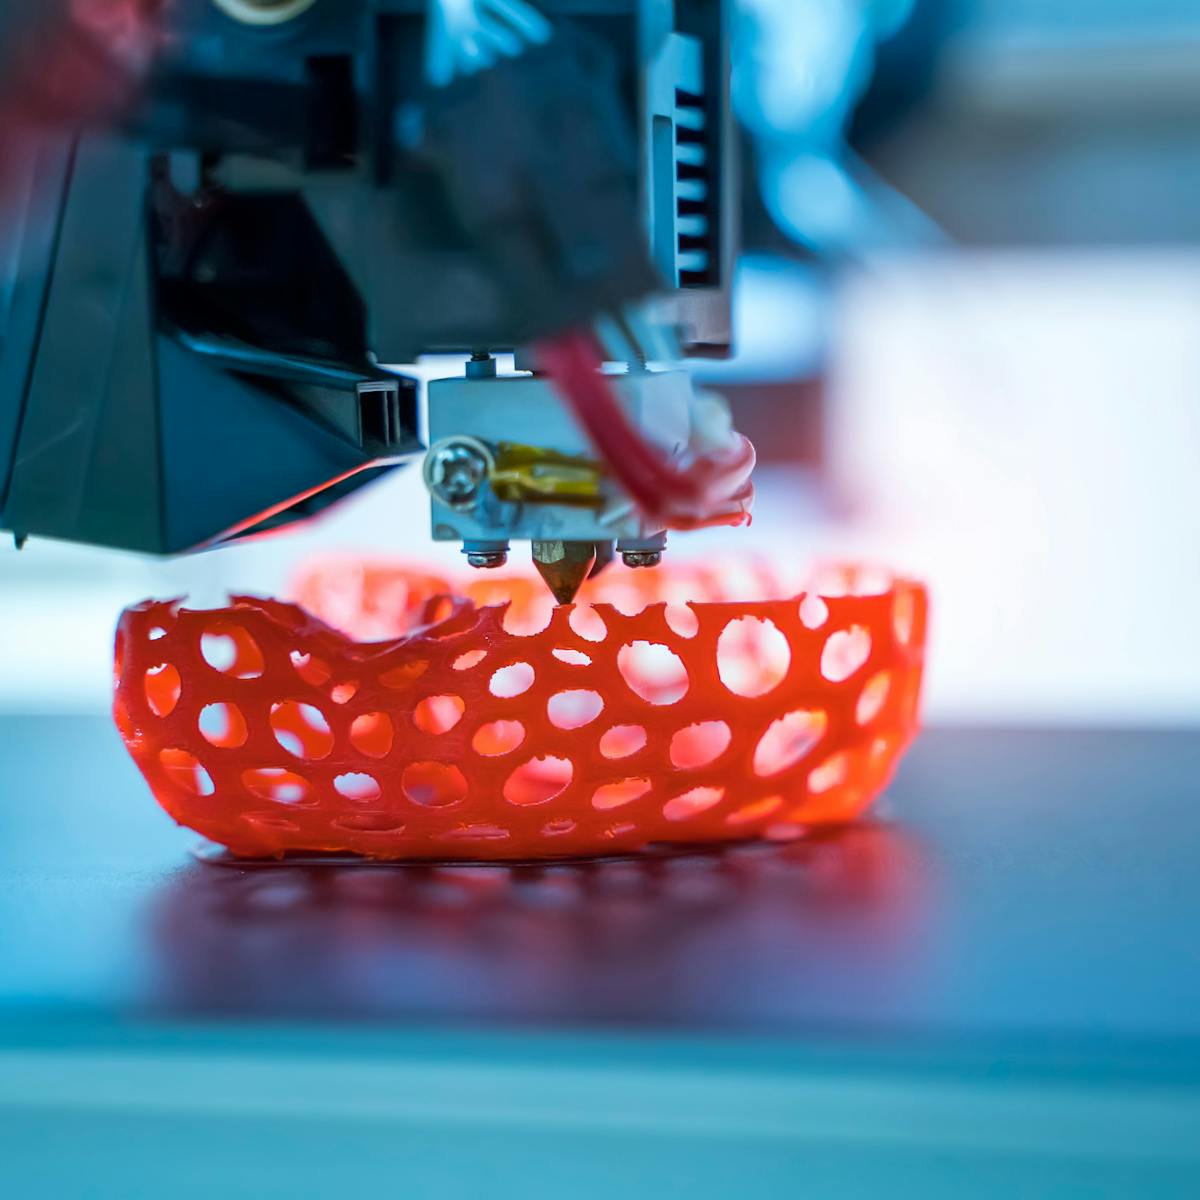 Need a DIY project? Here's how to modify a 3D printer to make food or ceramics – new research